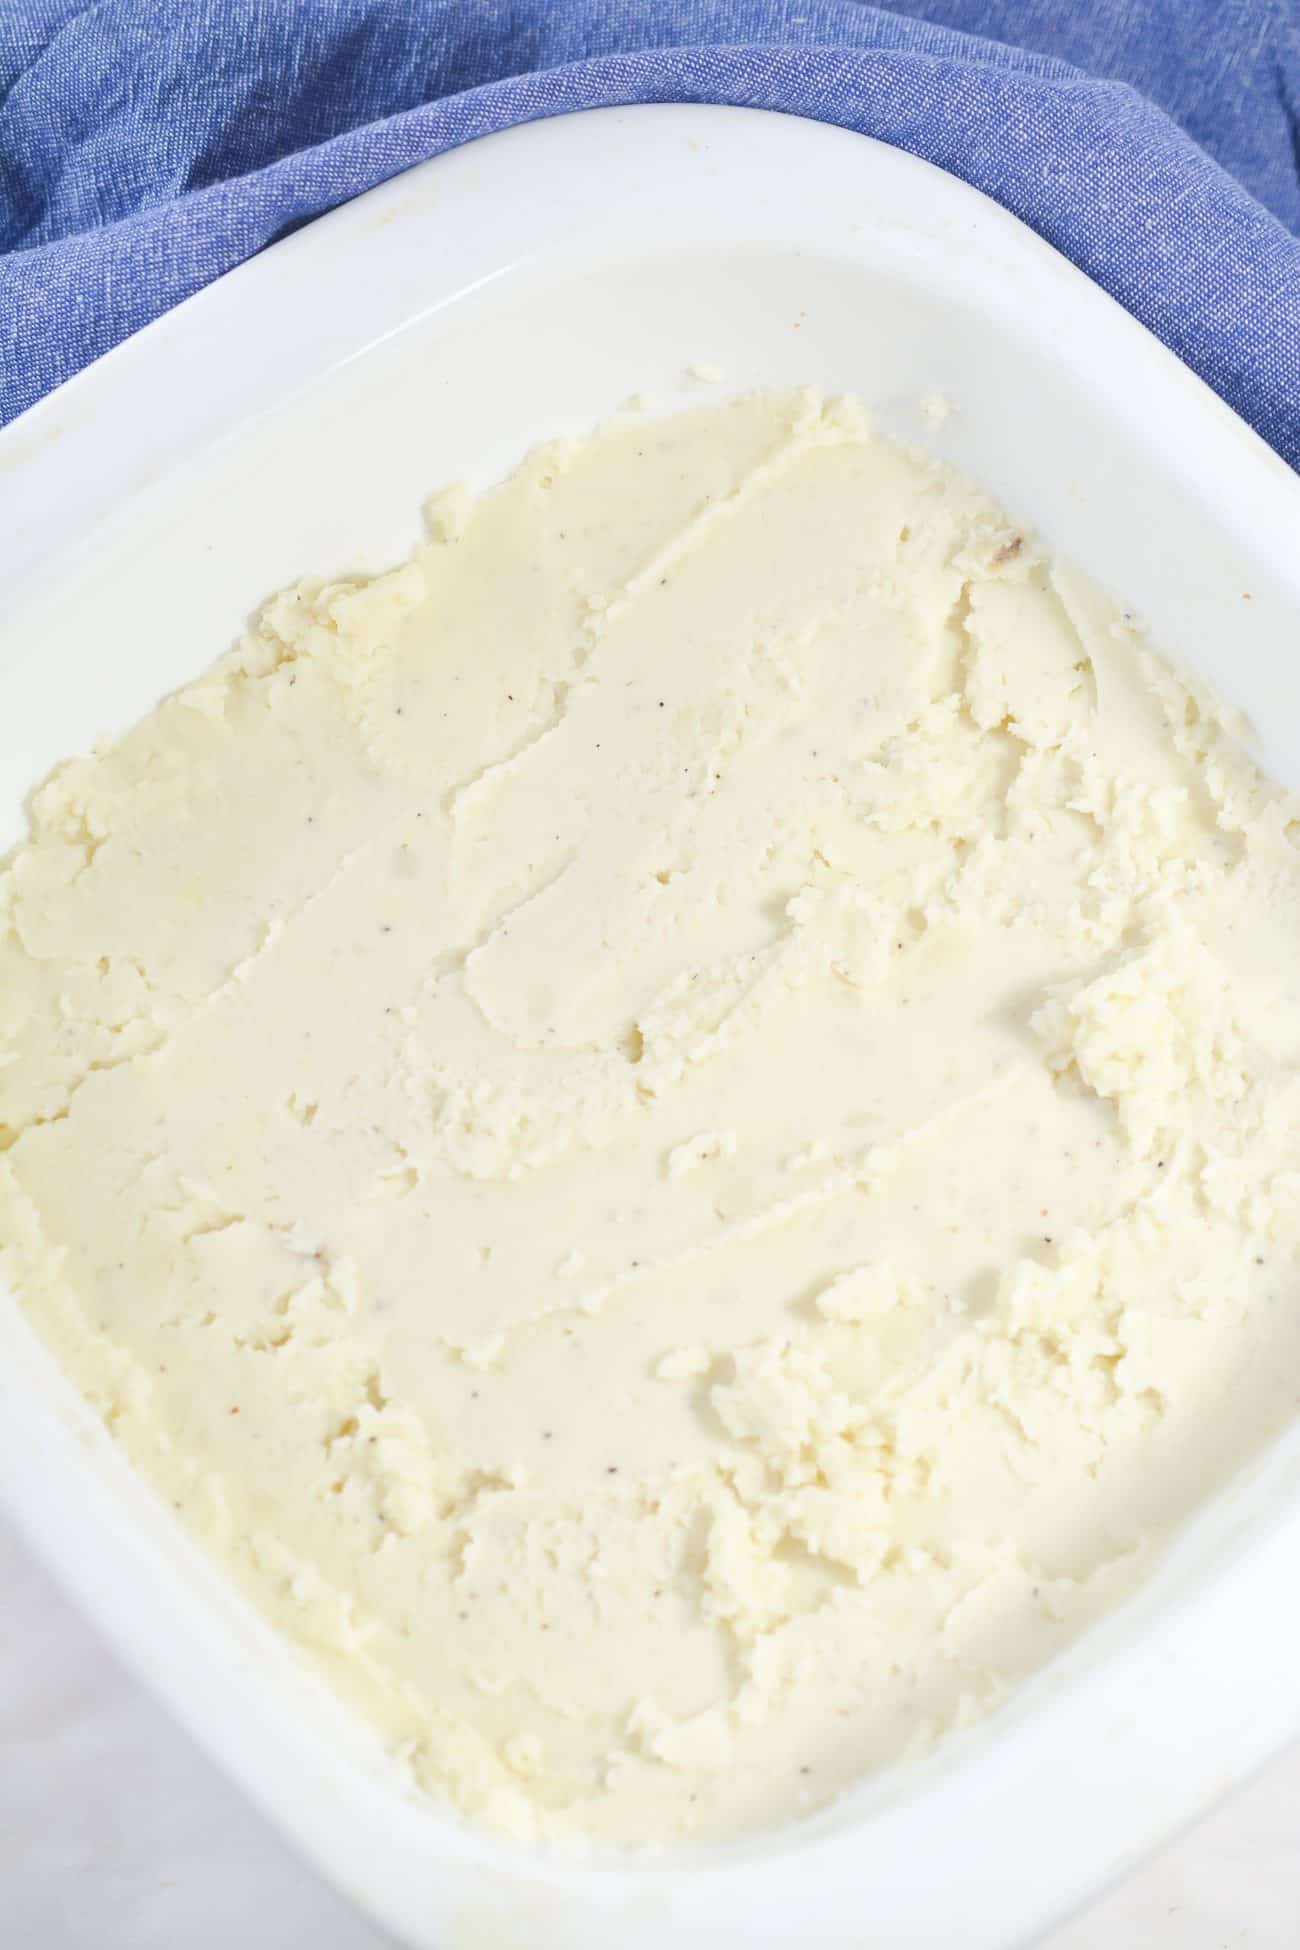 Layer the mashed potatoes on the bottom of a well greased 9x9 baking dish.